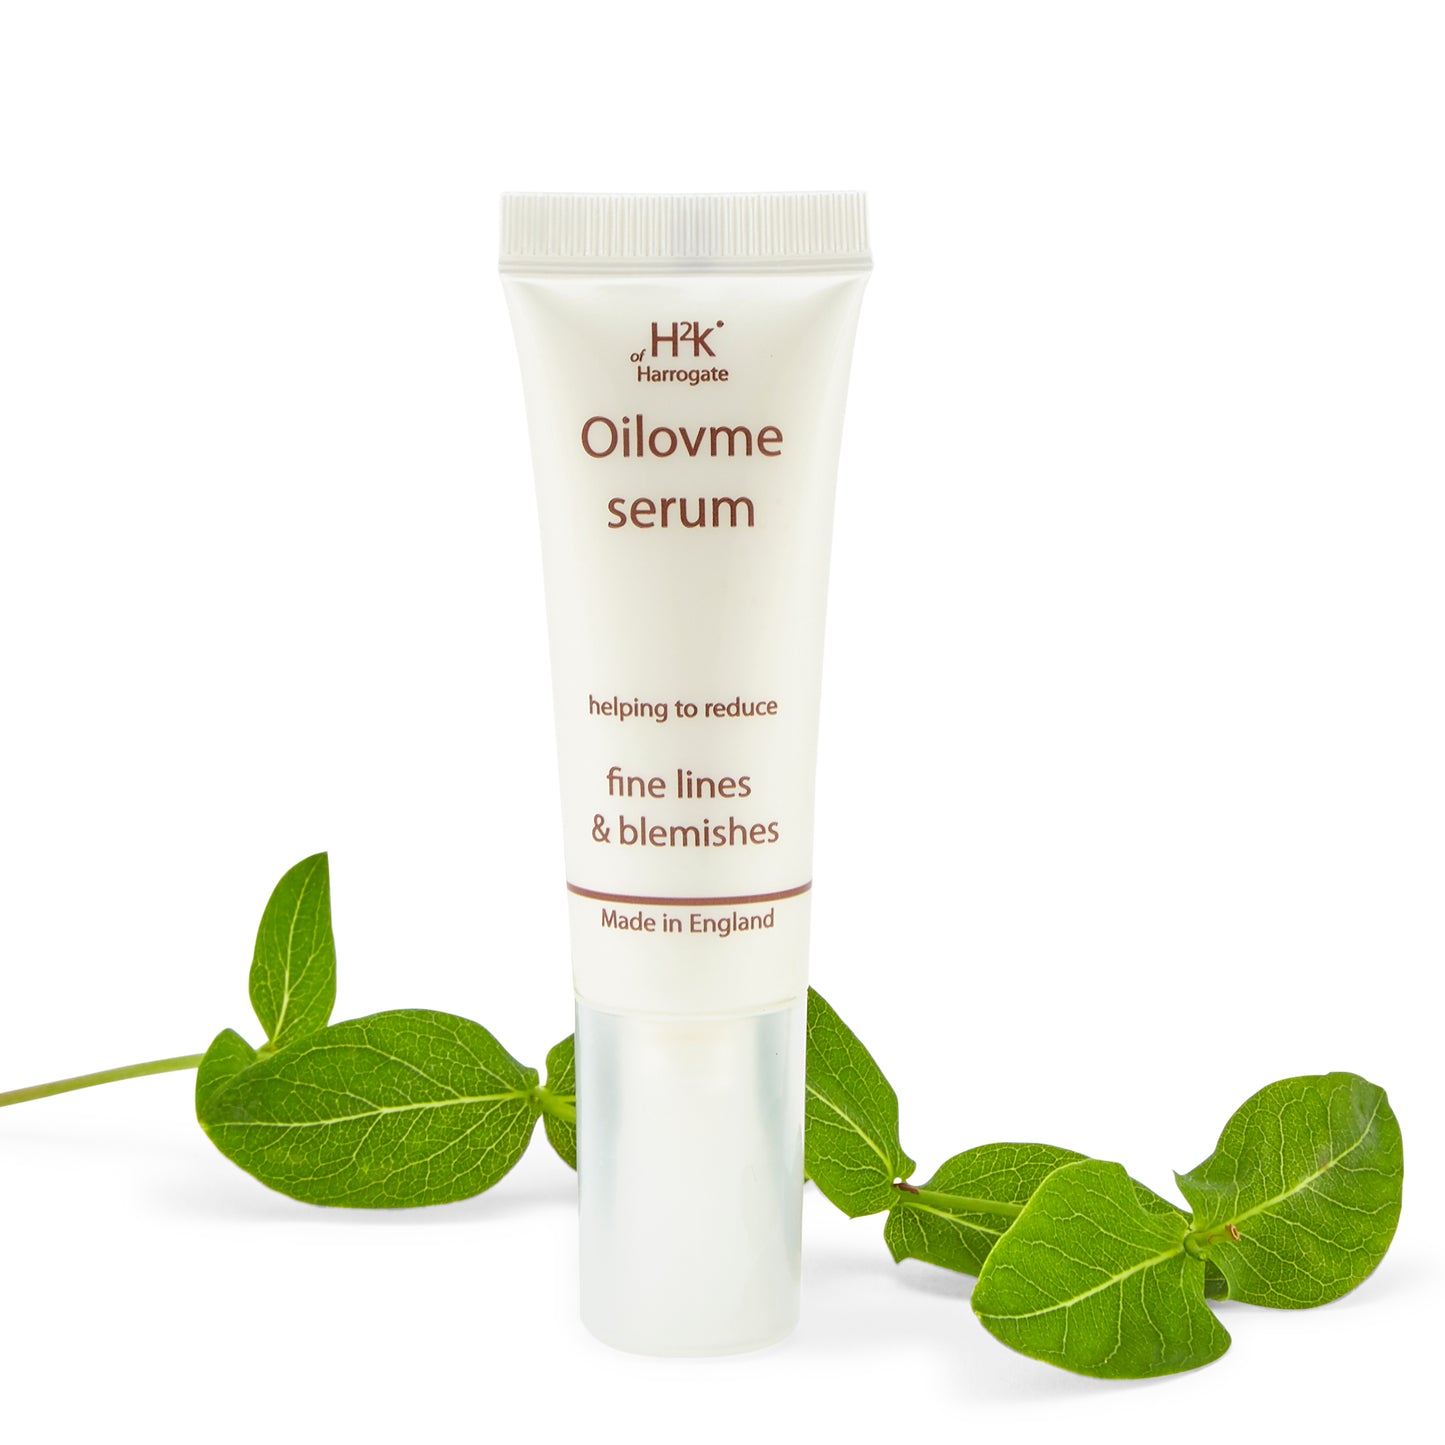 Serum, to help to reduce fine lines and blemishes